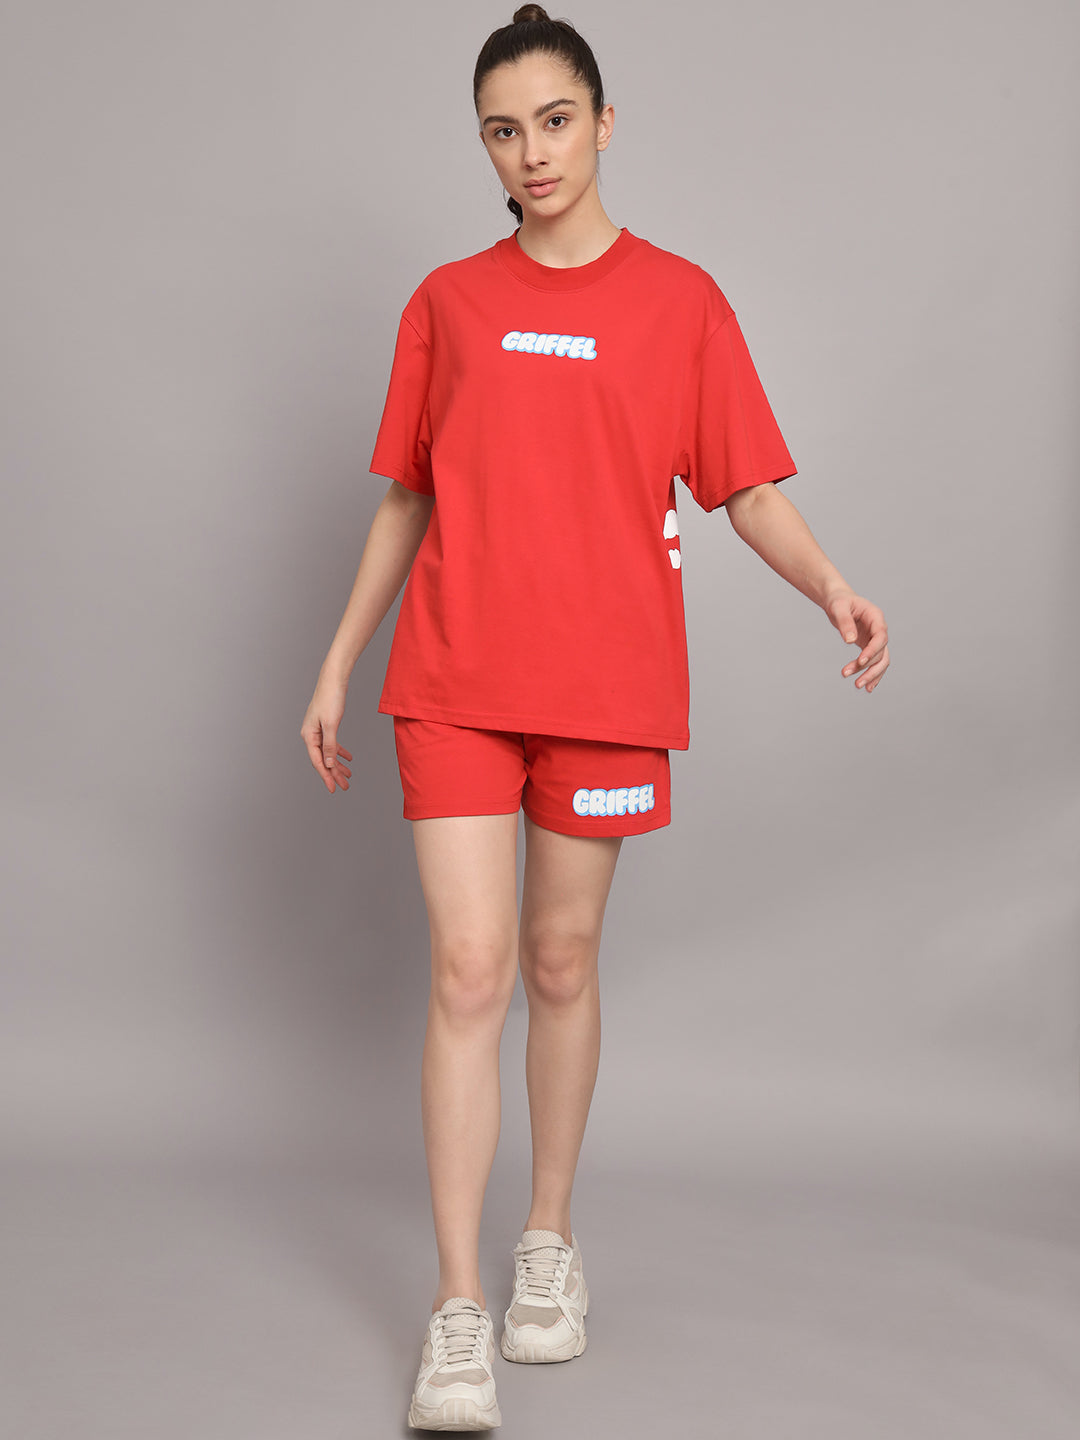 GRIFFEL Women Printed Loose fit Red T-shirt and Short Set - griffel